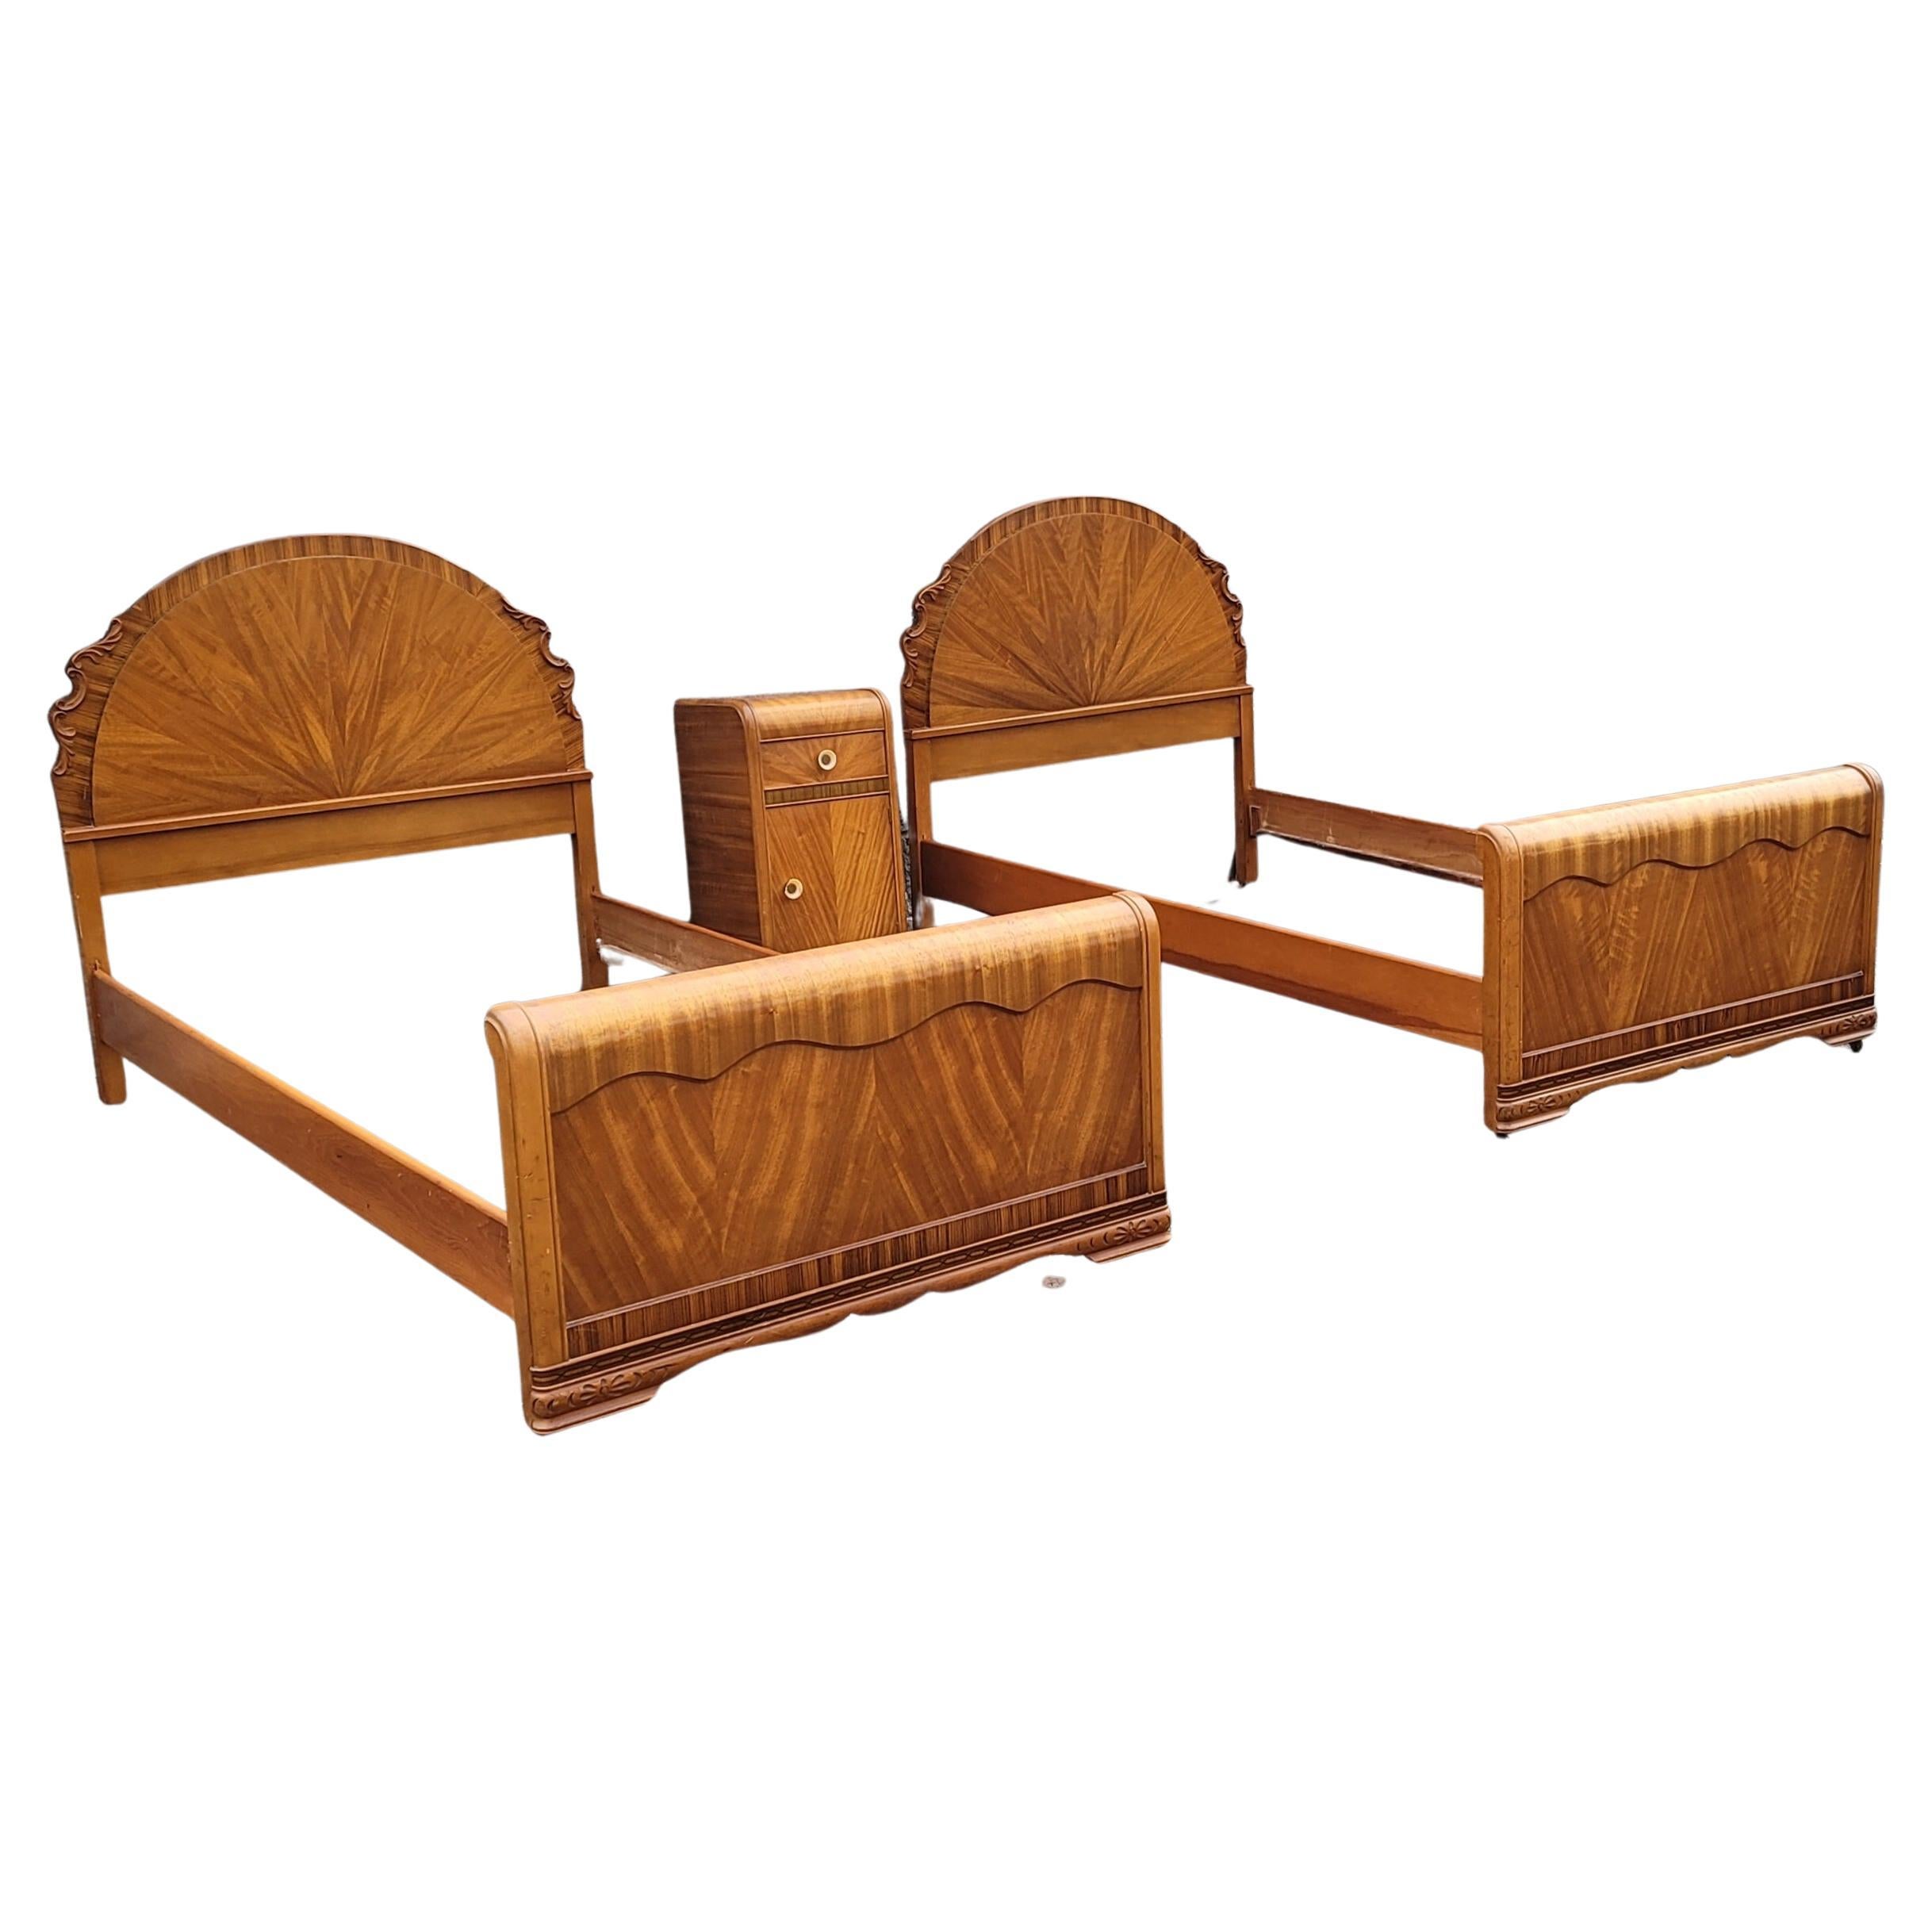 An exquisite pair of 1930s Art Deco style Bedstead in great vintage condition. Measure 41